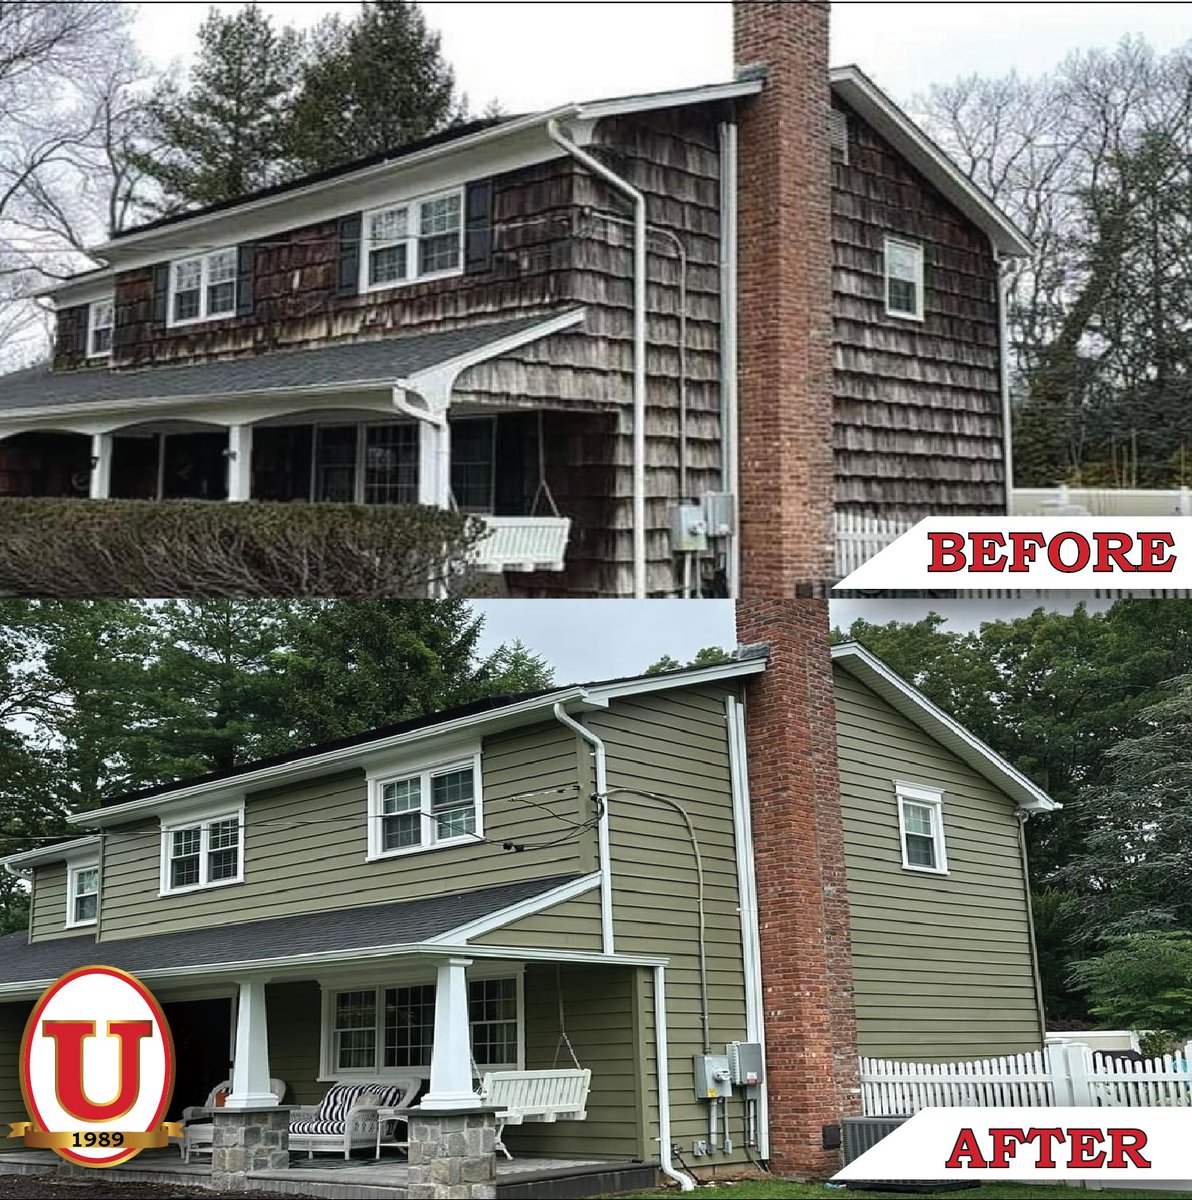 🏠✨ Say goodbye to old wood shingle #siding and hello to fresh green siding! 🌿 We transformed this #home by replacing outdated features with new #windows, trim, exterior lineals, and a top-of-the-line #gutter system. Ready for a stunning upgrade? #TransformationTuesday